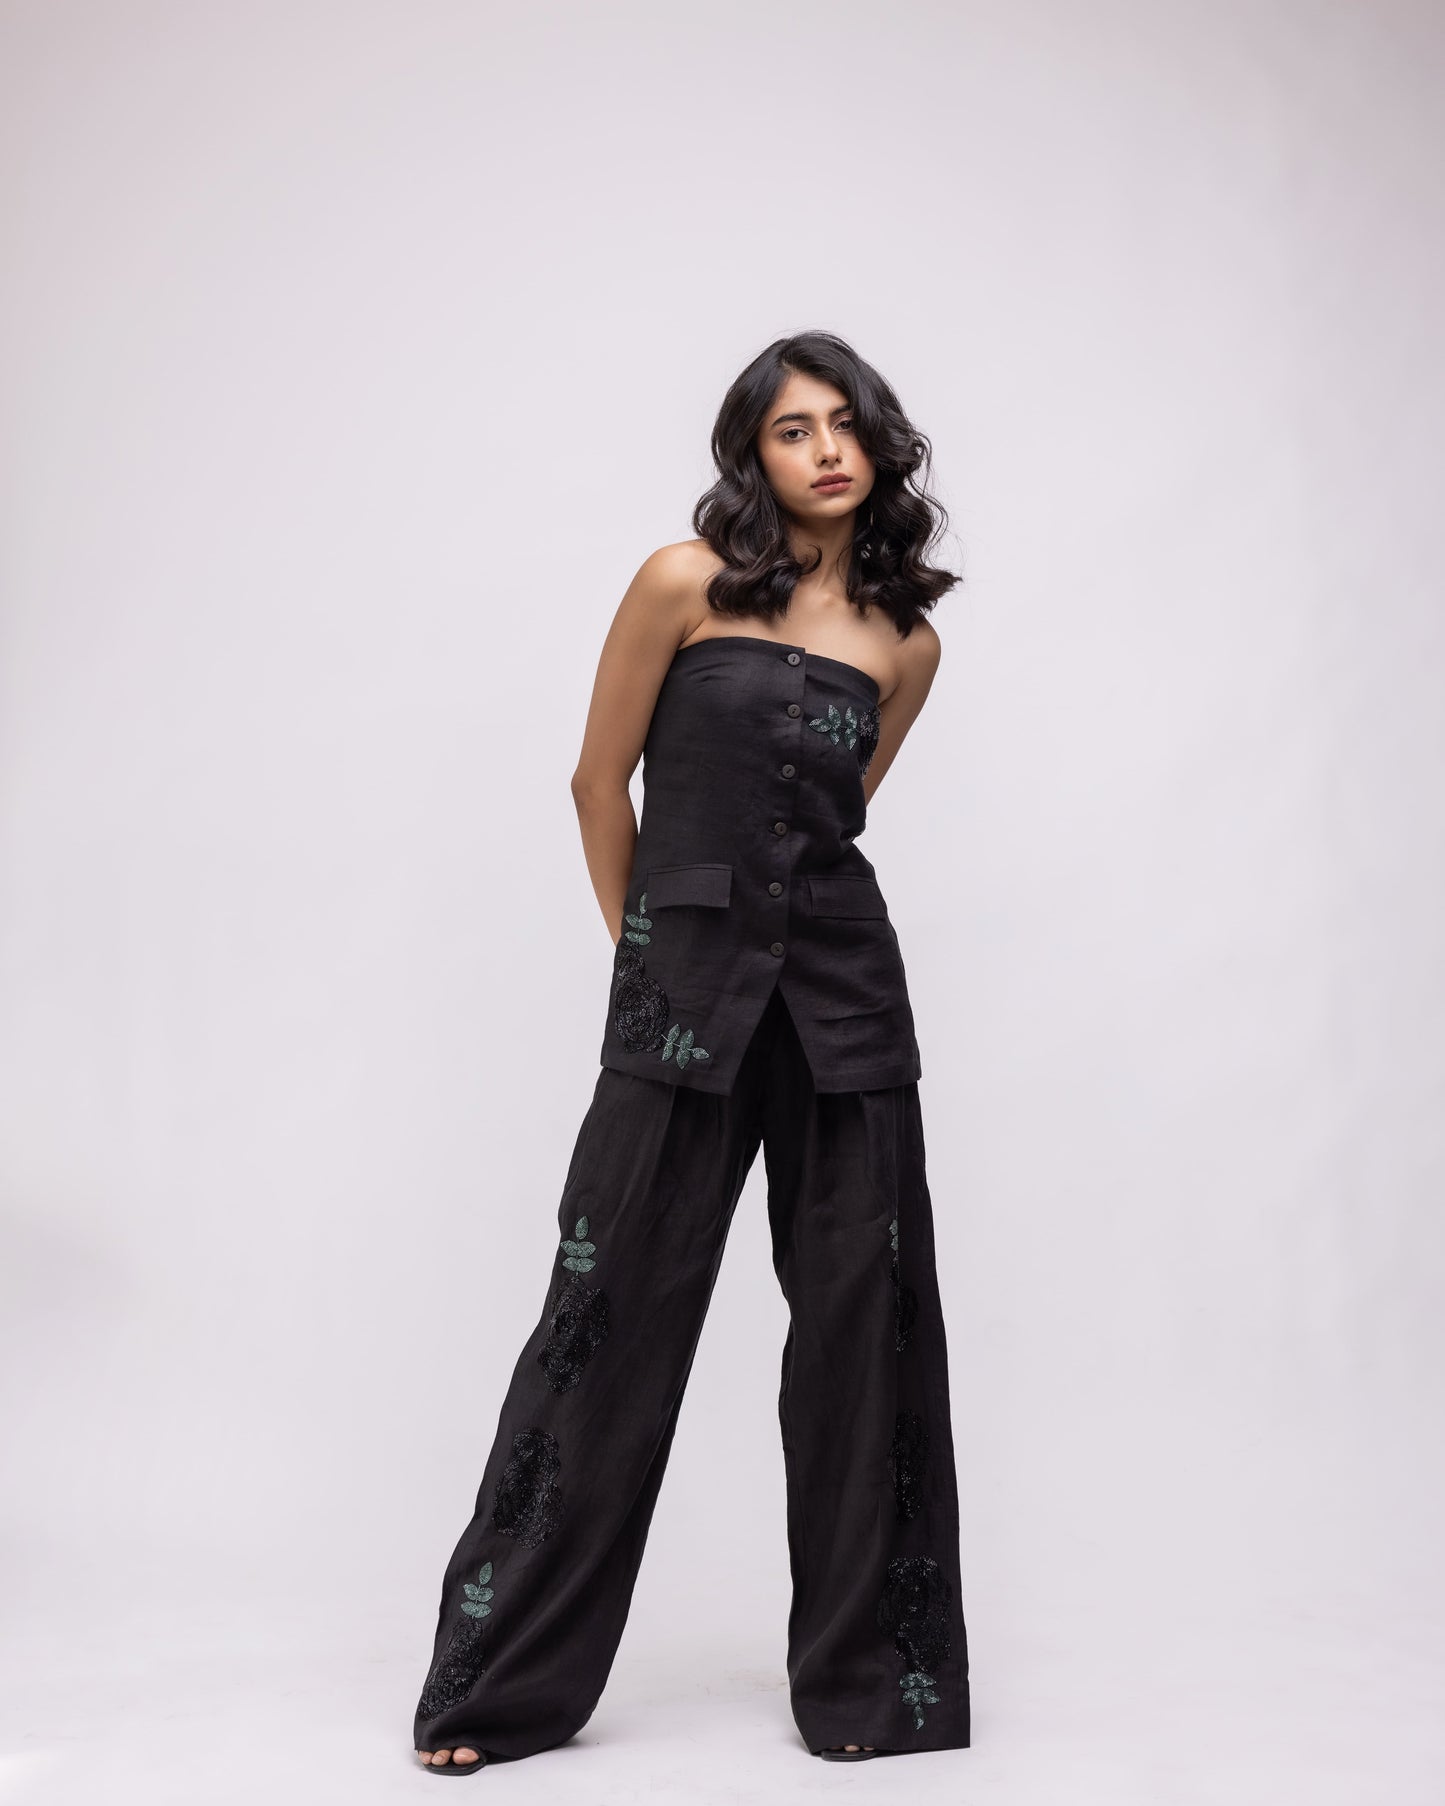 100% linen high-waisted trousers with hand-embroidery